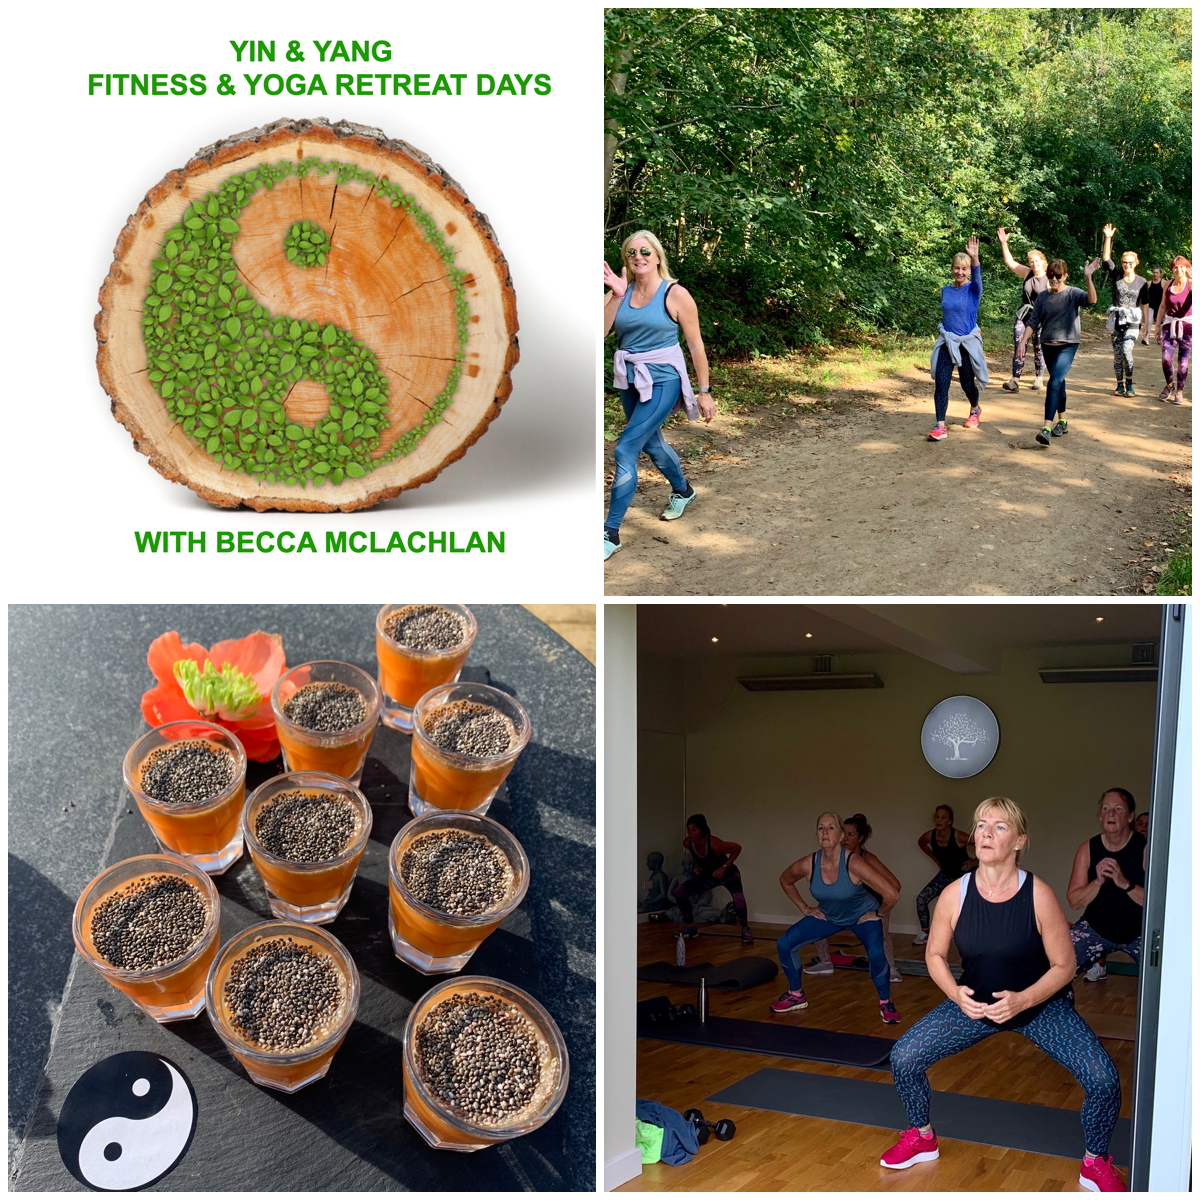 Yin & Yang Fitness & Yoga Small Group Retreat Day - (FULLY BOOKED - email becca@becca-mclachlan.com to be added to the cancellation list)